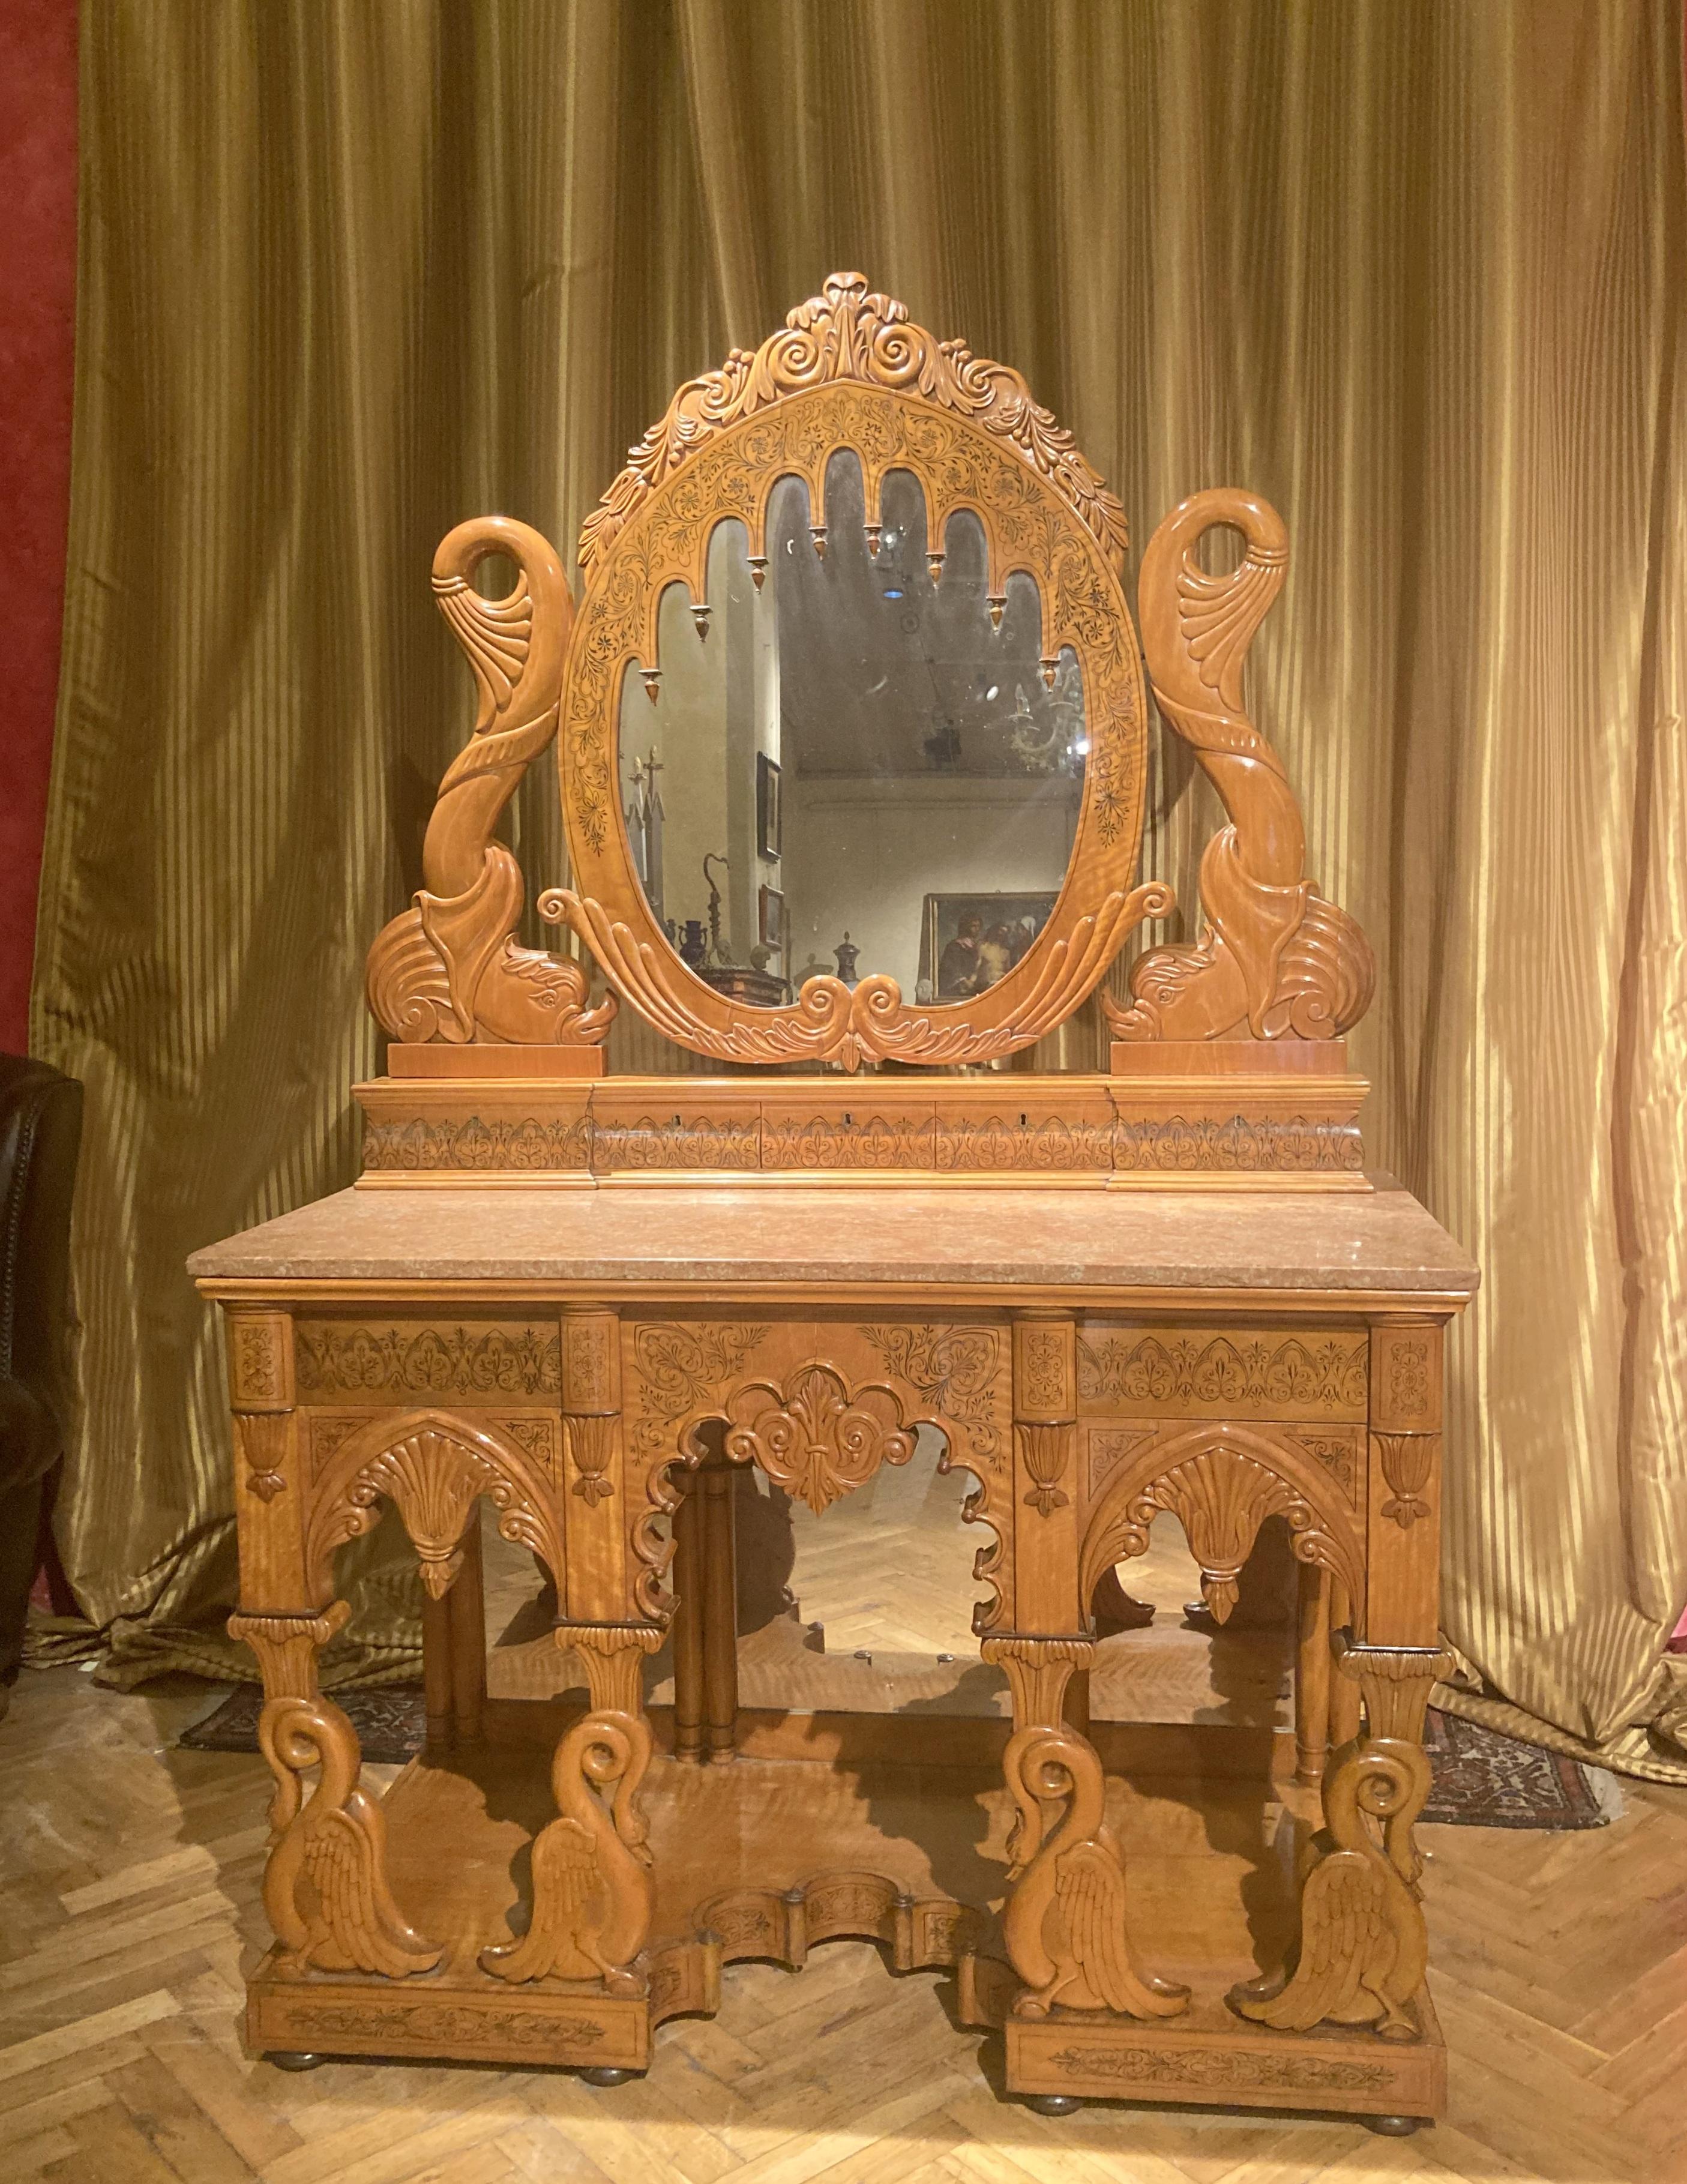 This Italian Regency period pier console or dressing table with swivel mirror and marble top is made of solid and burl maple wood and it's a one of a kind piece that expresses the joint result of Italian high end cabinet-making and design mastery